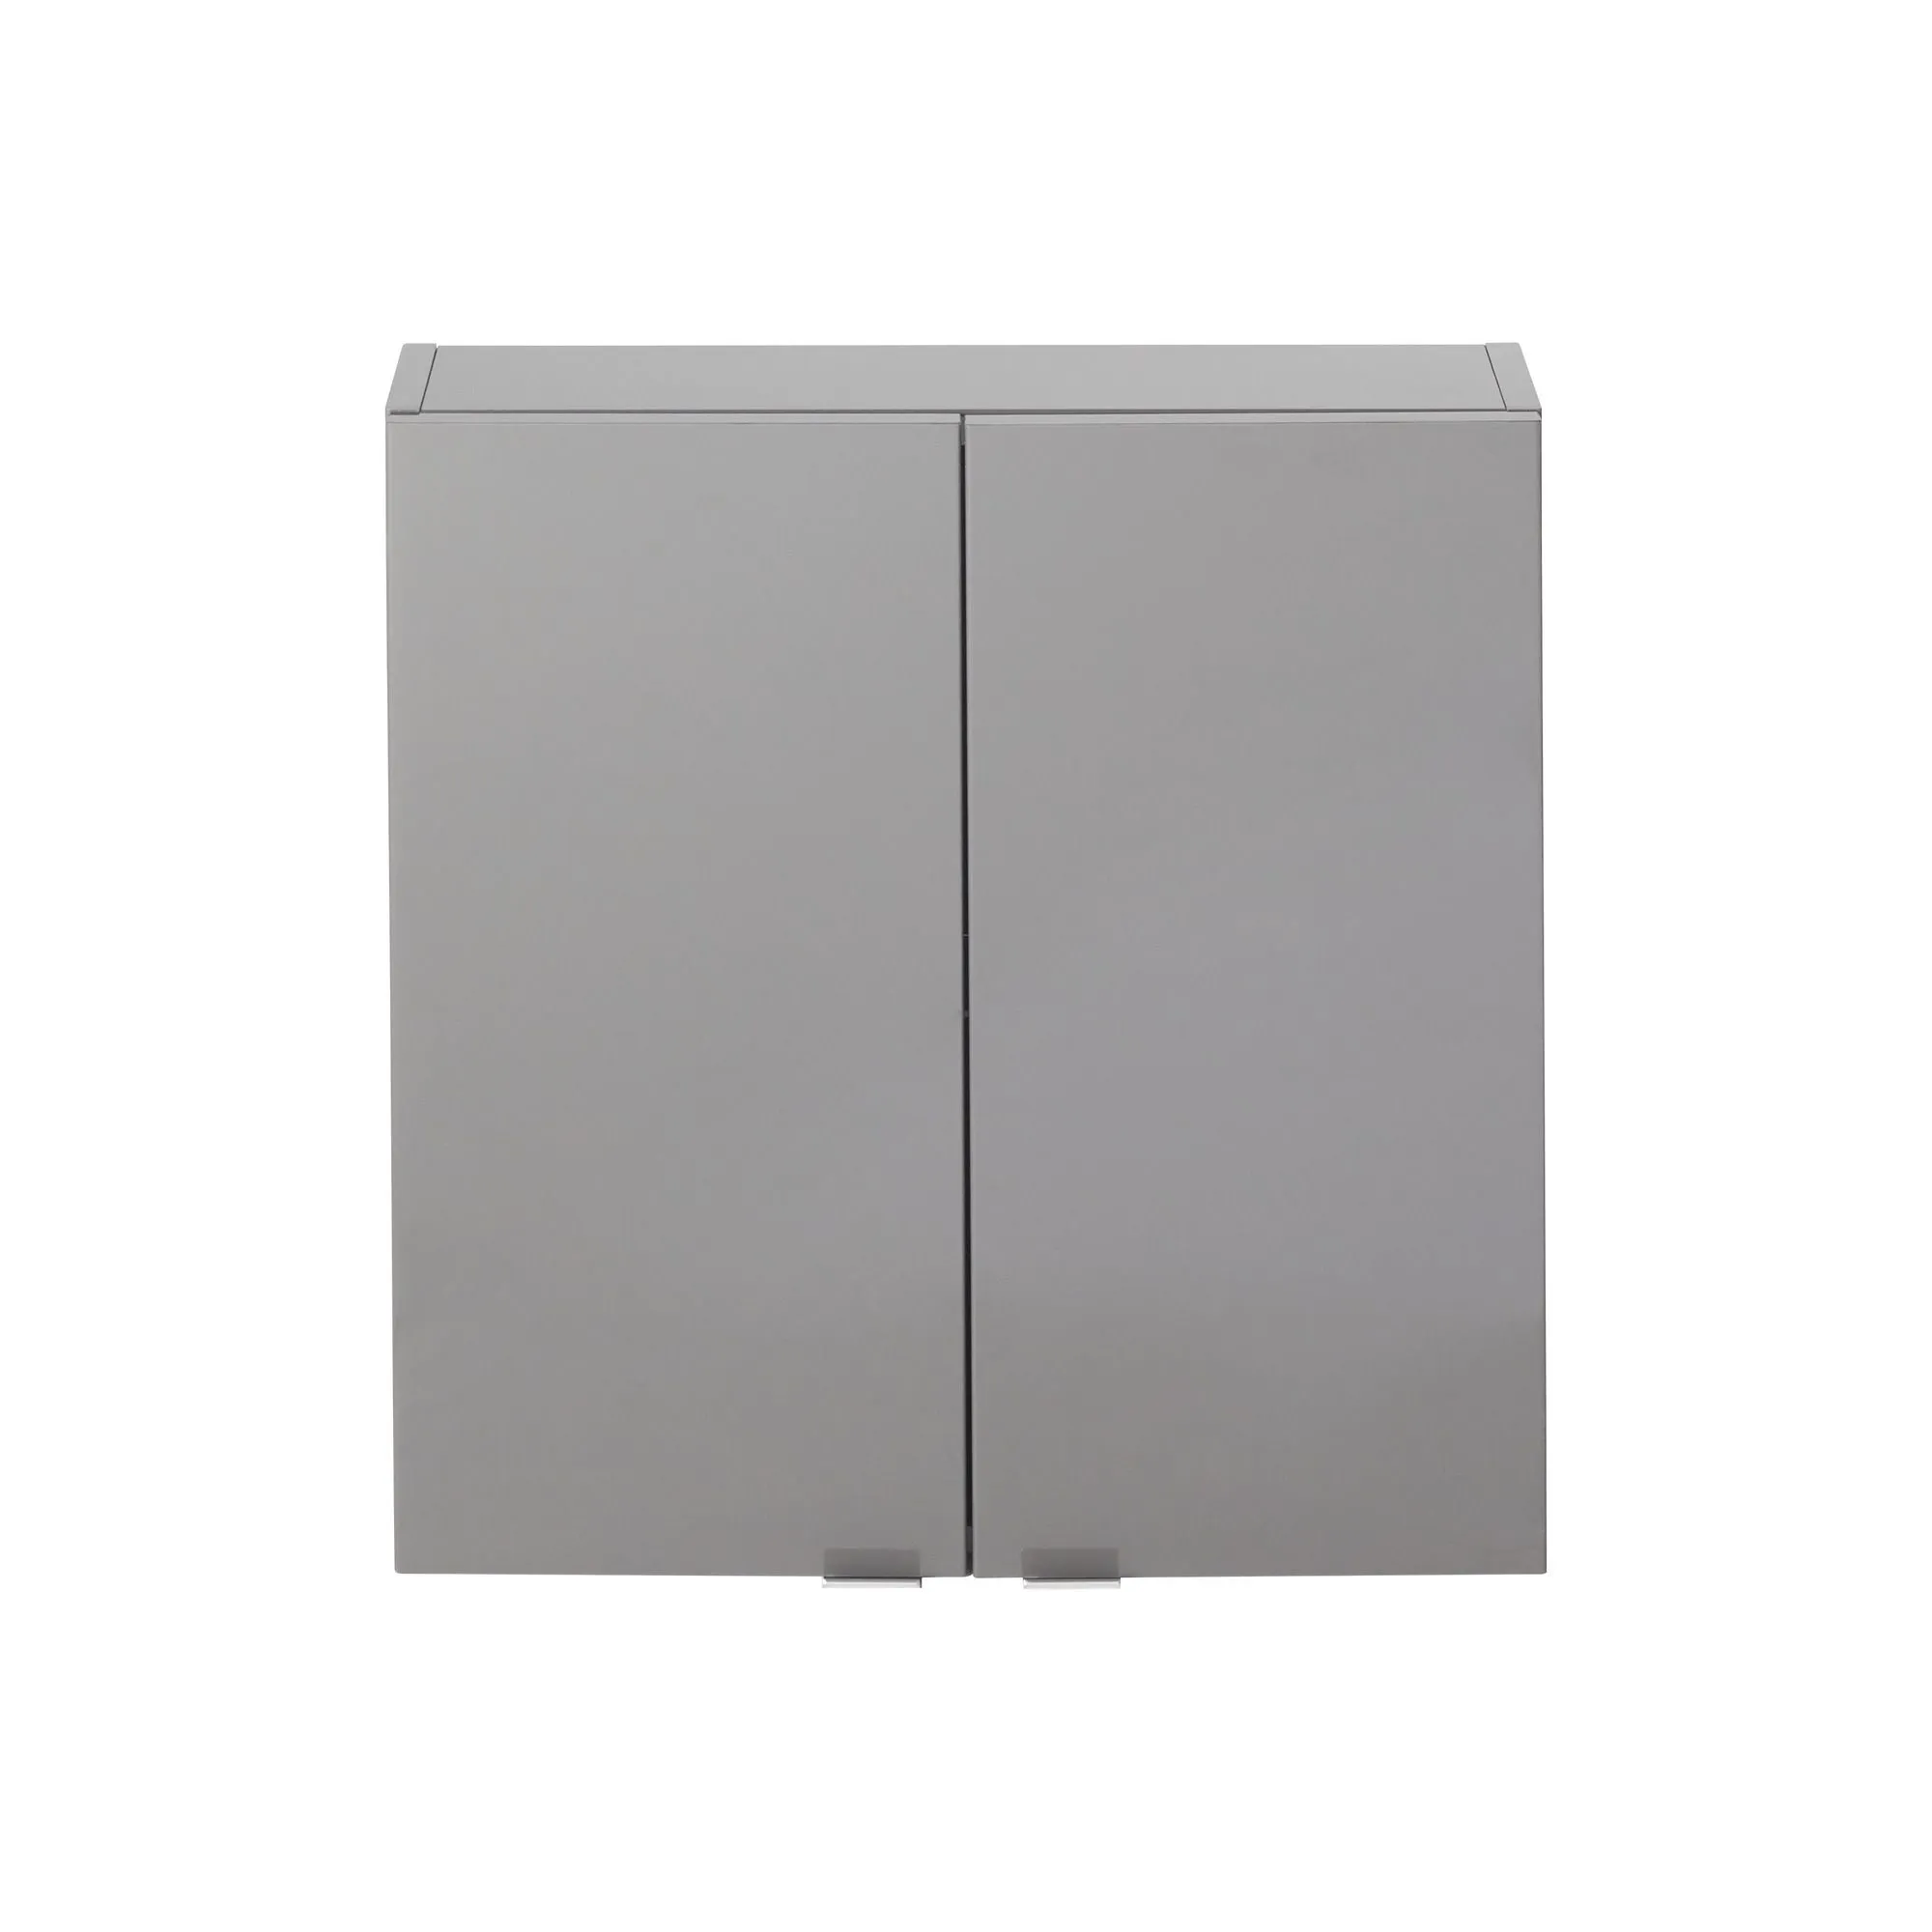 GoodHome Imandra Gloss Anthracite Wall-mounted Bathroom Cabinet (W)600mm (H)600mm